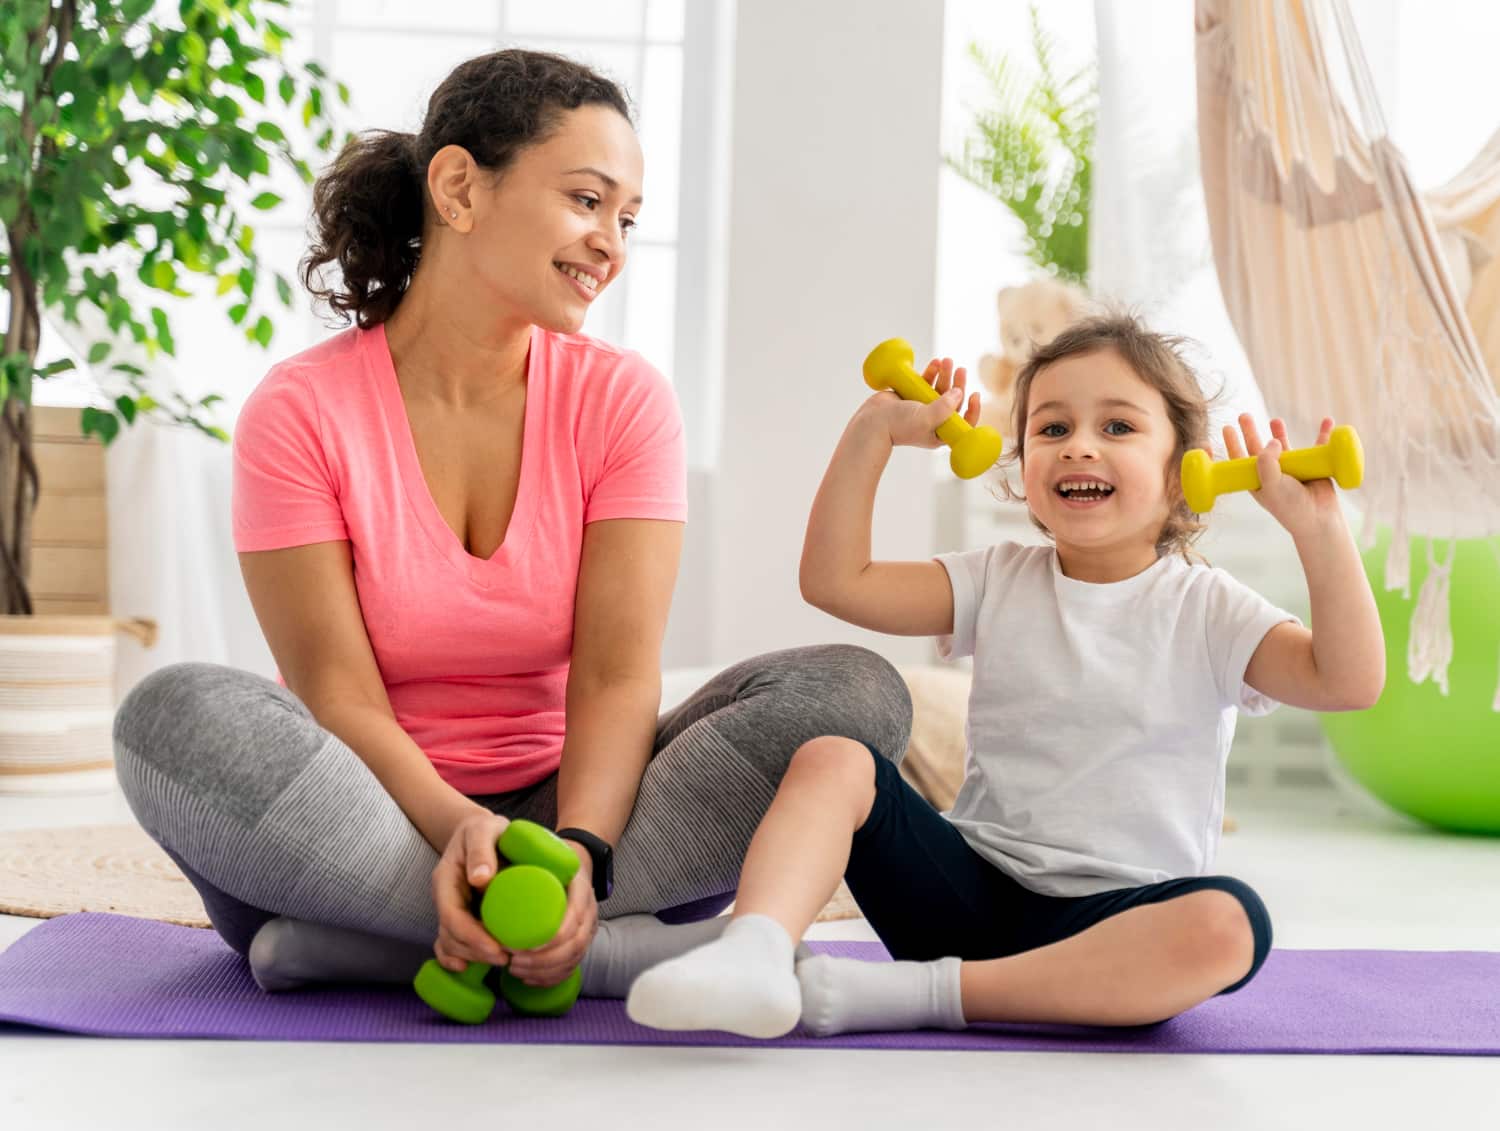 Fun and Fitness: How to Keep Kids Active and Healthy